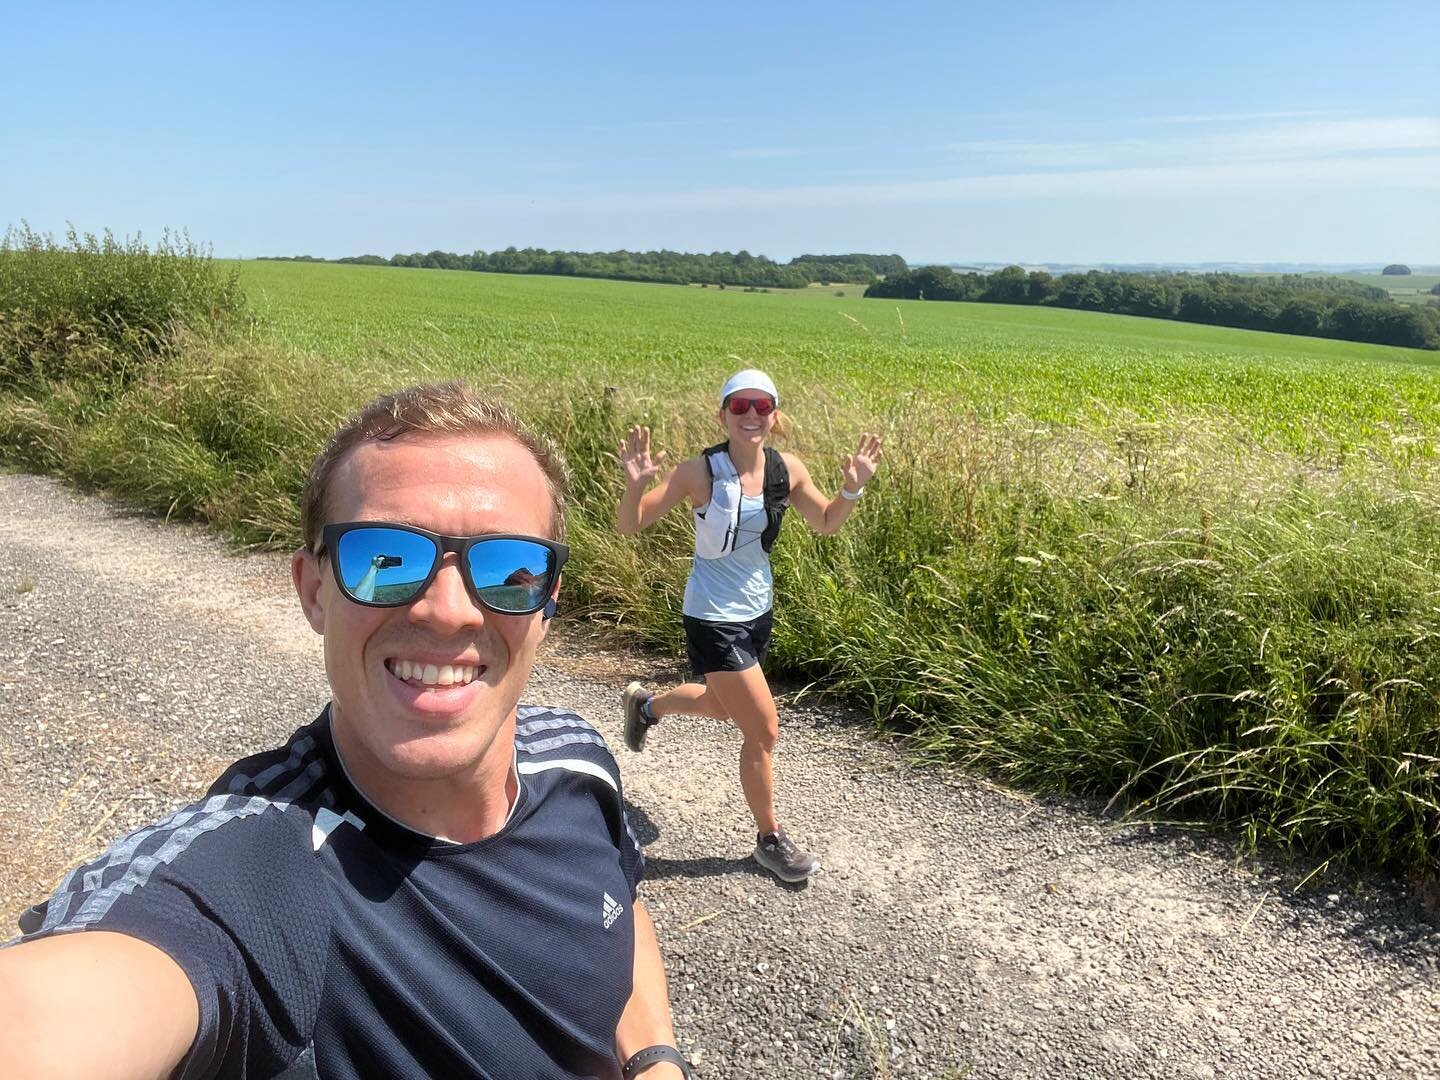 8 lovely trail miles with Alex today ☀️

It might look like I&rsquo;m enjoying myself, but I was definitely riding the struggle bus for the whole way 😅 it is absolutely boiling out there!

Feels like I&rsquo;m currently stuck in one of those patches